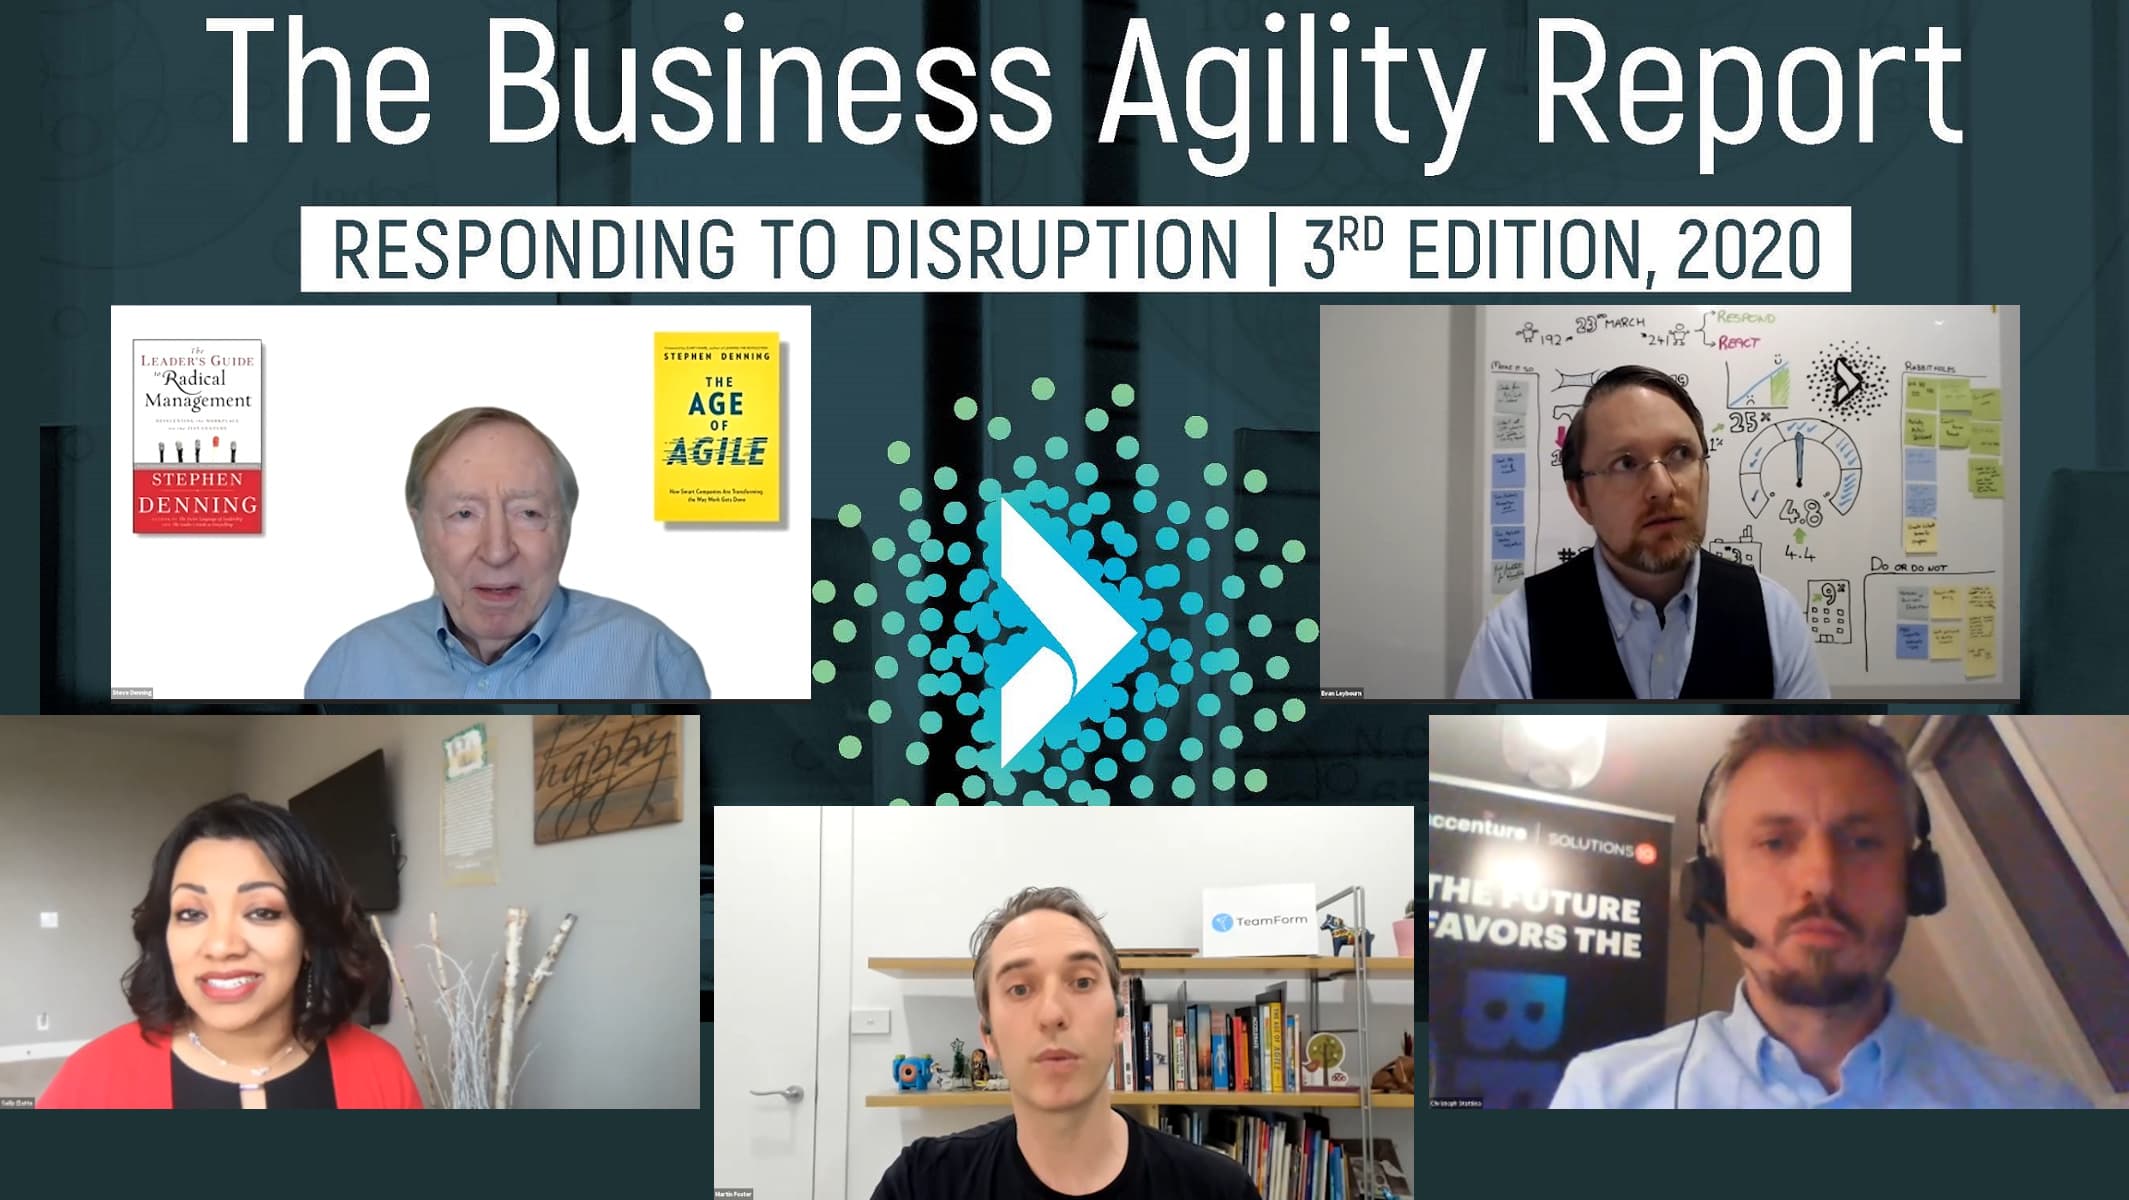 Insights from the 2020 Business Agility Report launch